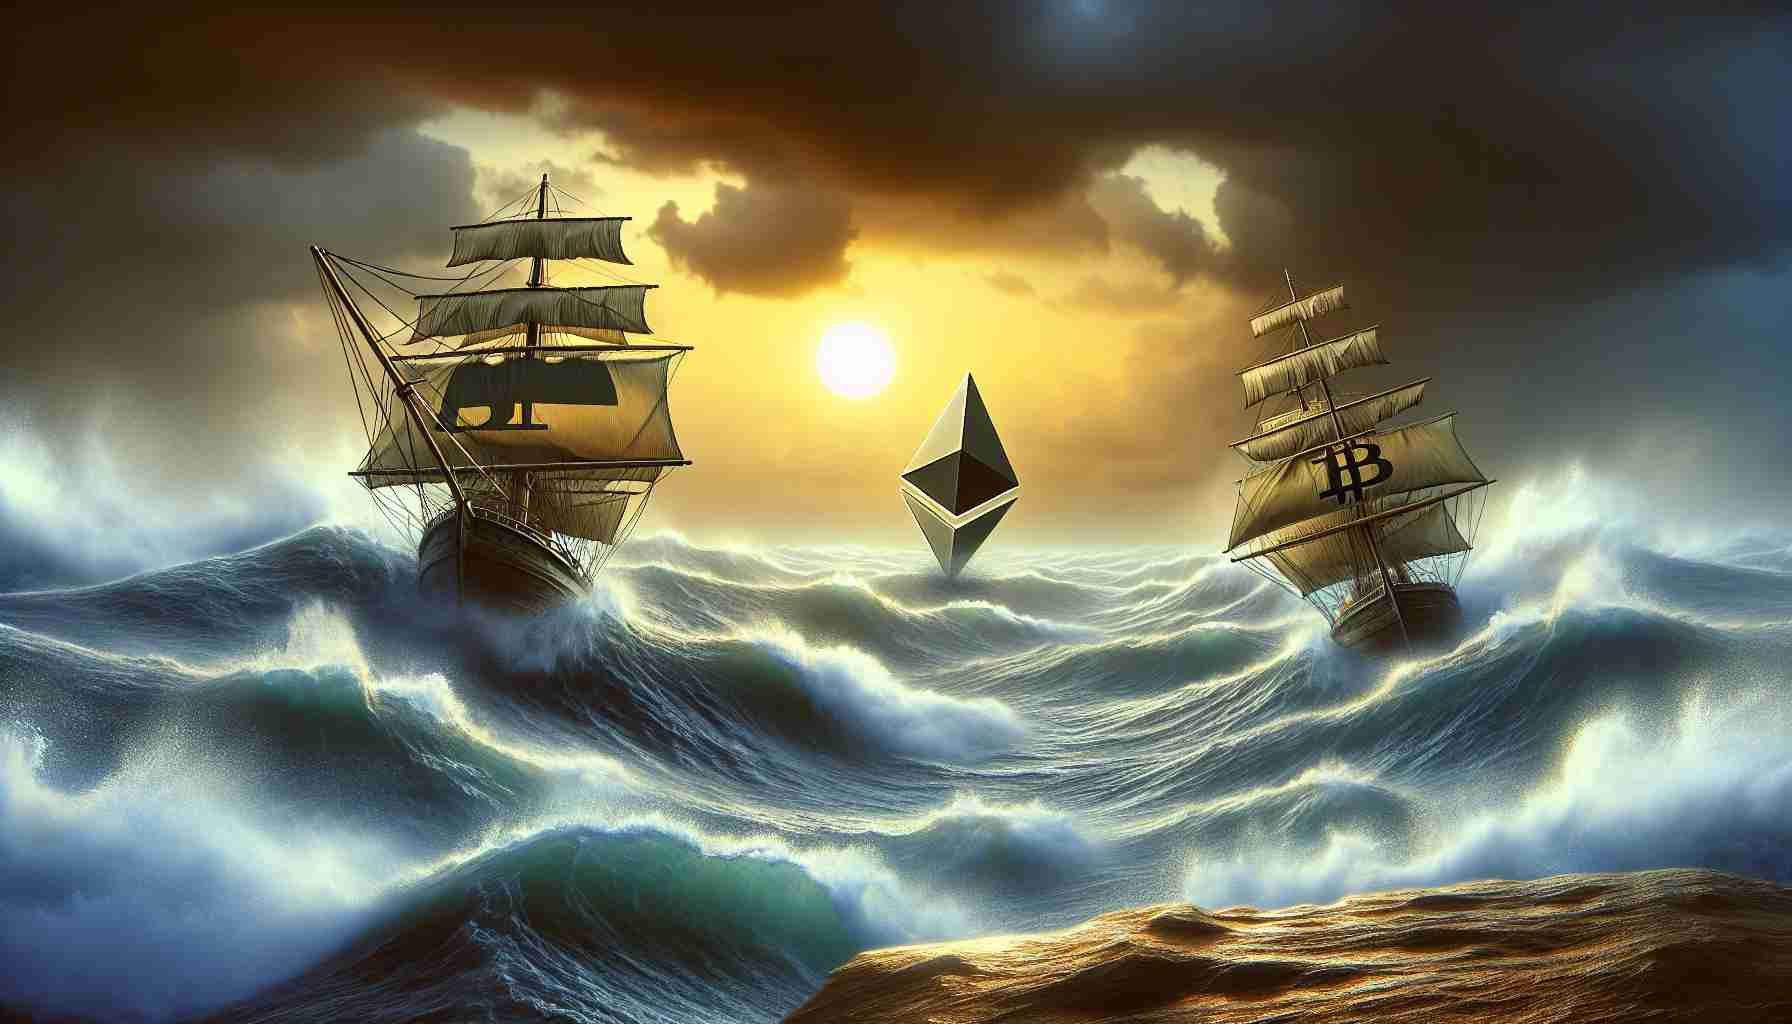 High-definition realistic photograph depicting the metaphorical representation of the cryptocurrency markets, namely Bitcoin and Ethereum, facing volatile challenges during a quarter. The scene depicts a rough, tumultuous sea with two ships symbolizing Bitcoin and Ethereum navigating through a storm, alluding to the market volatility. The ships are marked with an abstract logo resembling the known logos of Bitcoin and Ethereum respectively.